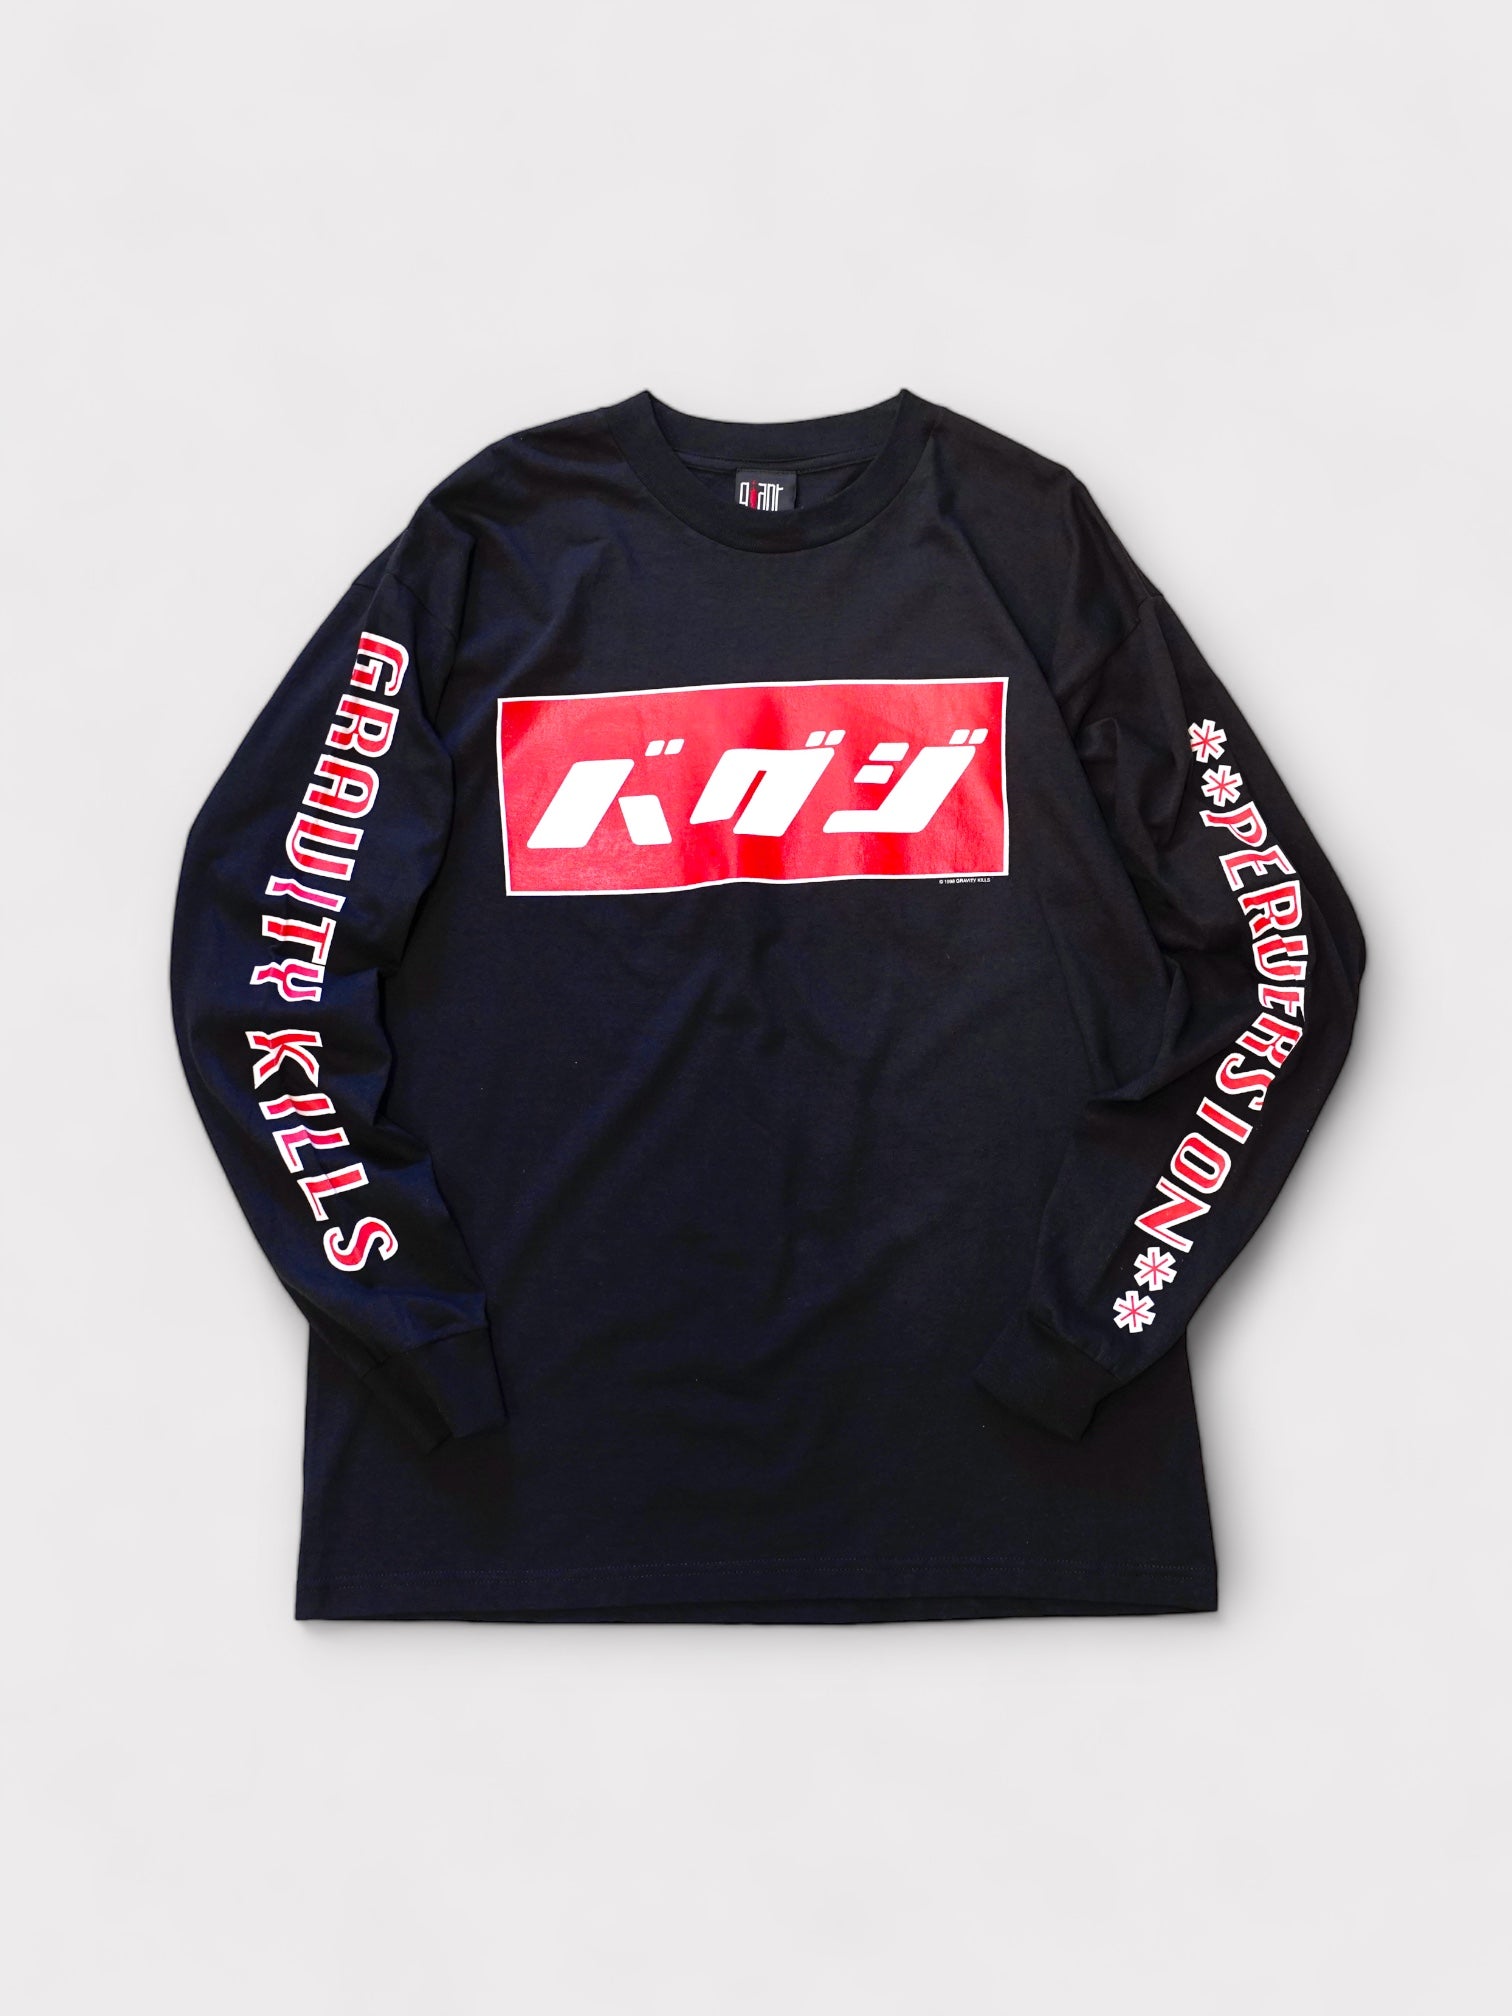 Deadstock 90's Giant "GRAVITY KILLS" "버그지" L/S made in Mexico【XL】그라비티 킬스 론T